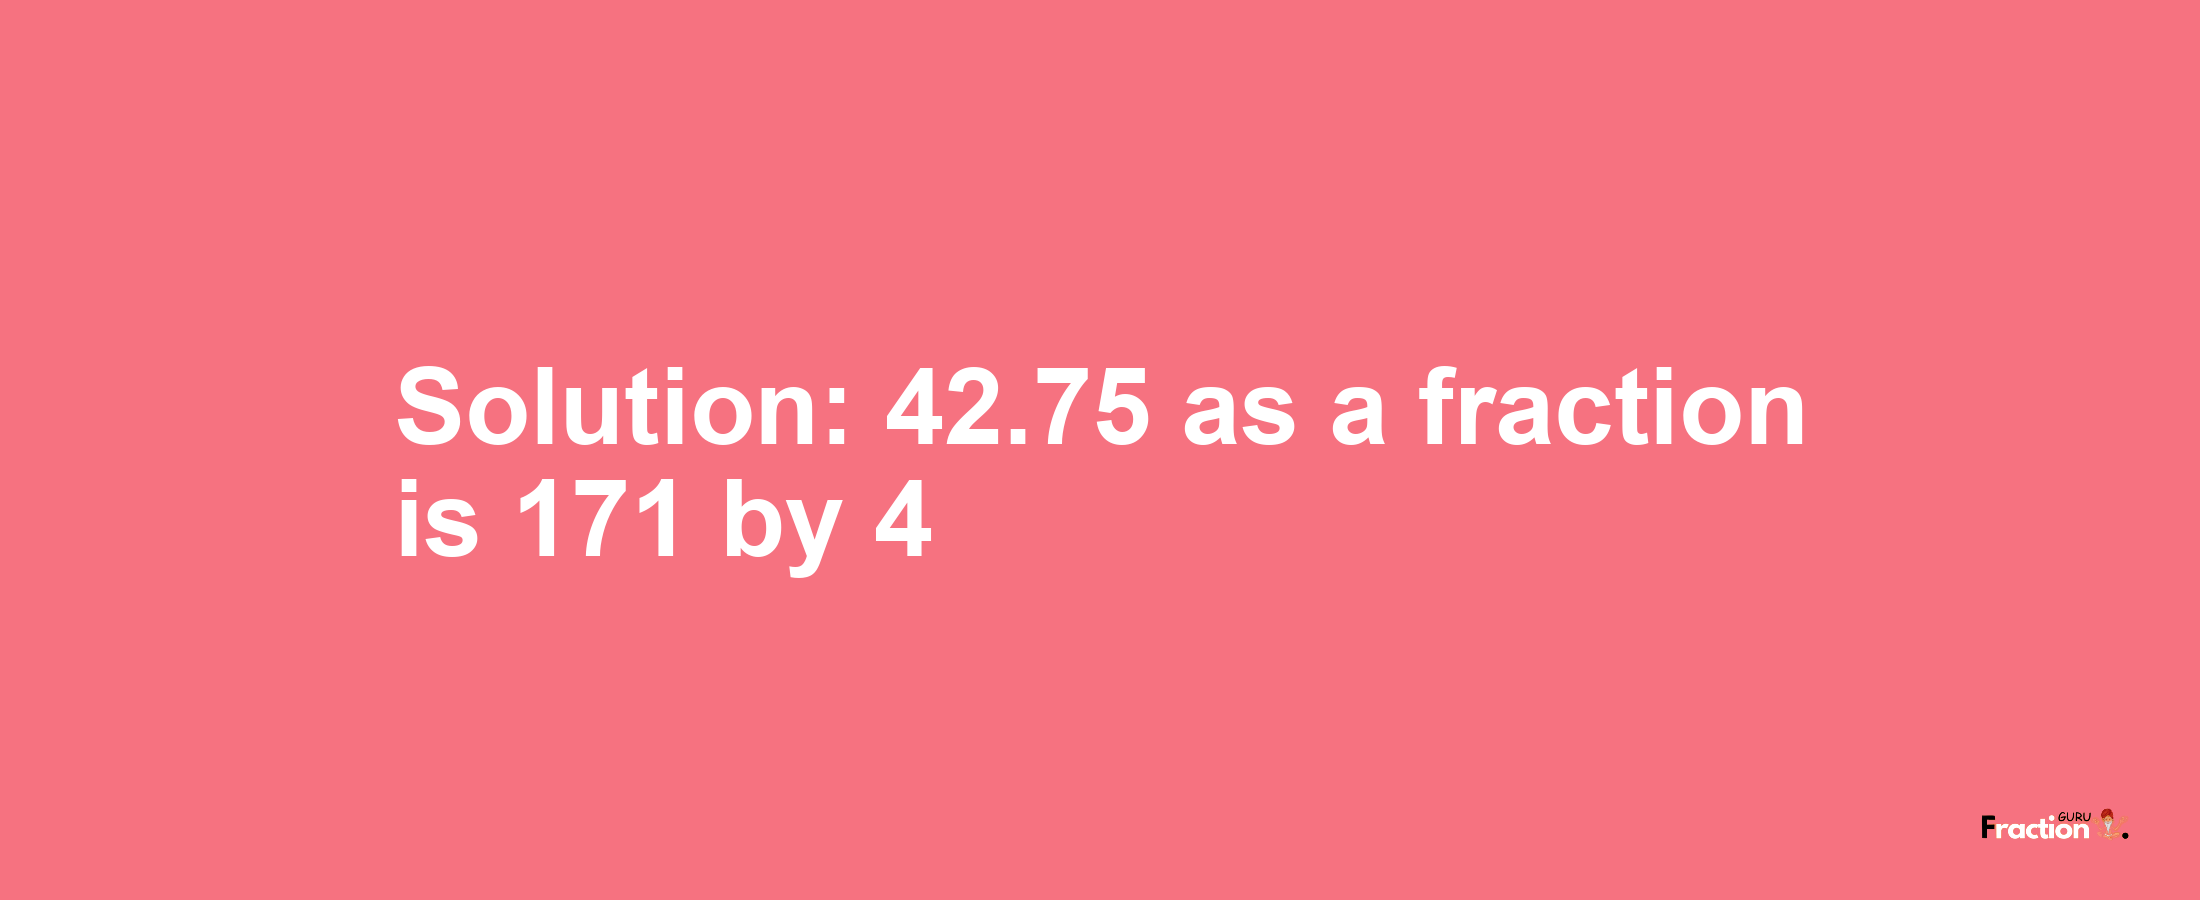 Solution:42.75 as a fraction is 171/4